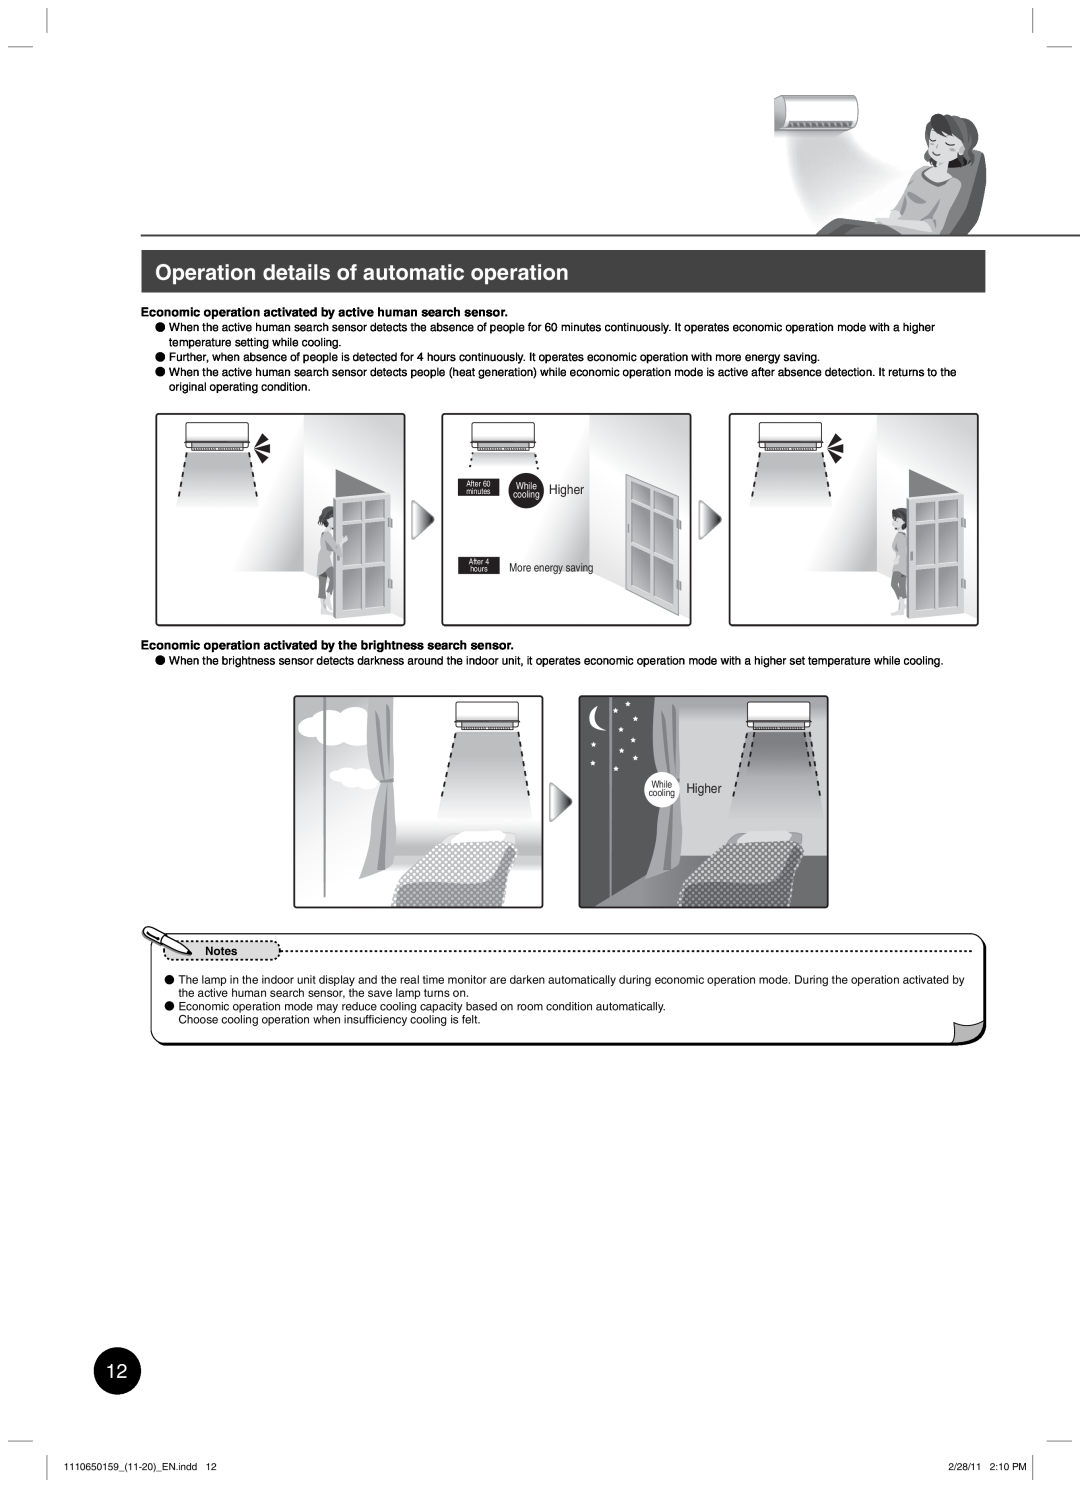 Toshiba RAS-10JKCVP owner manual Operation details of automatic operation, While Higher cooling 